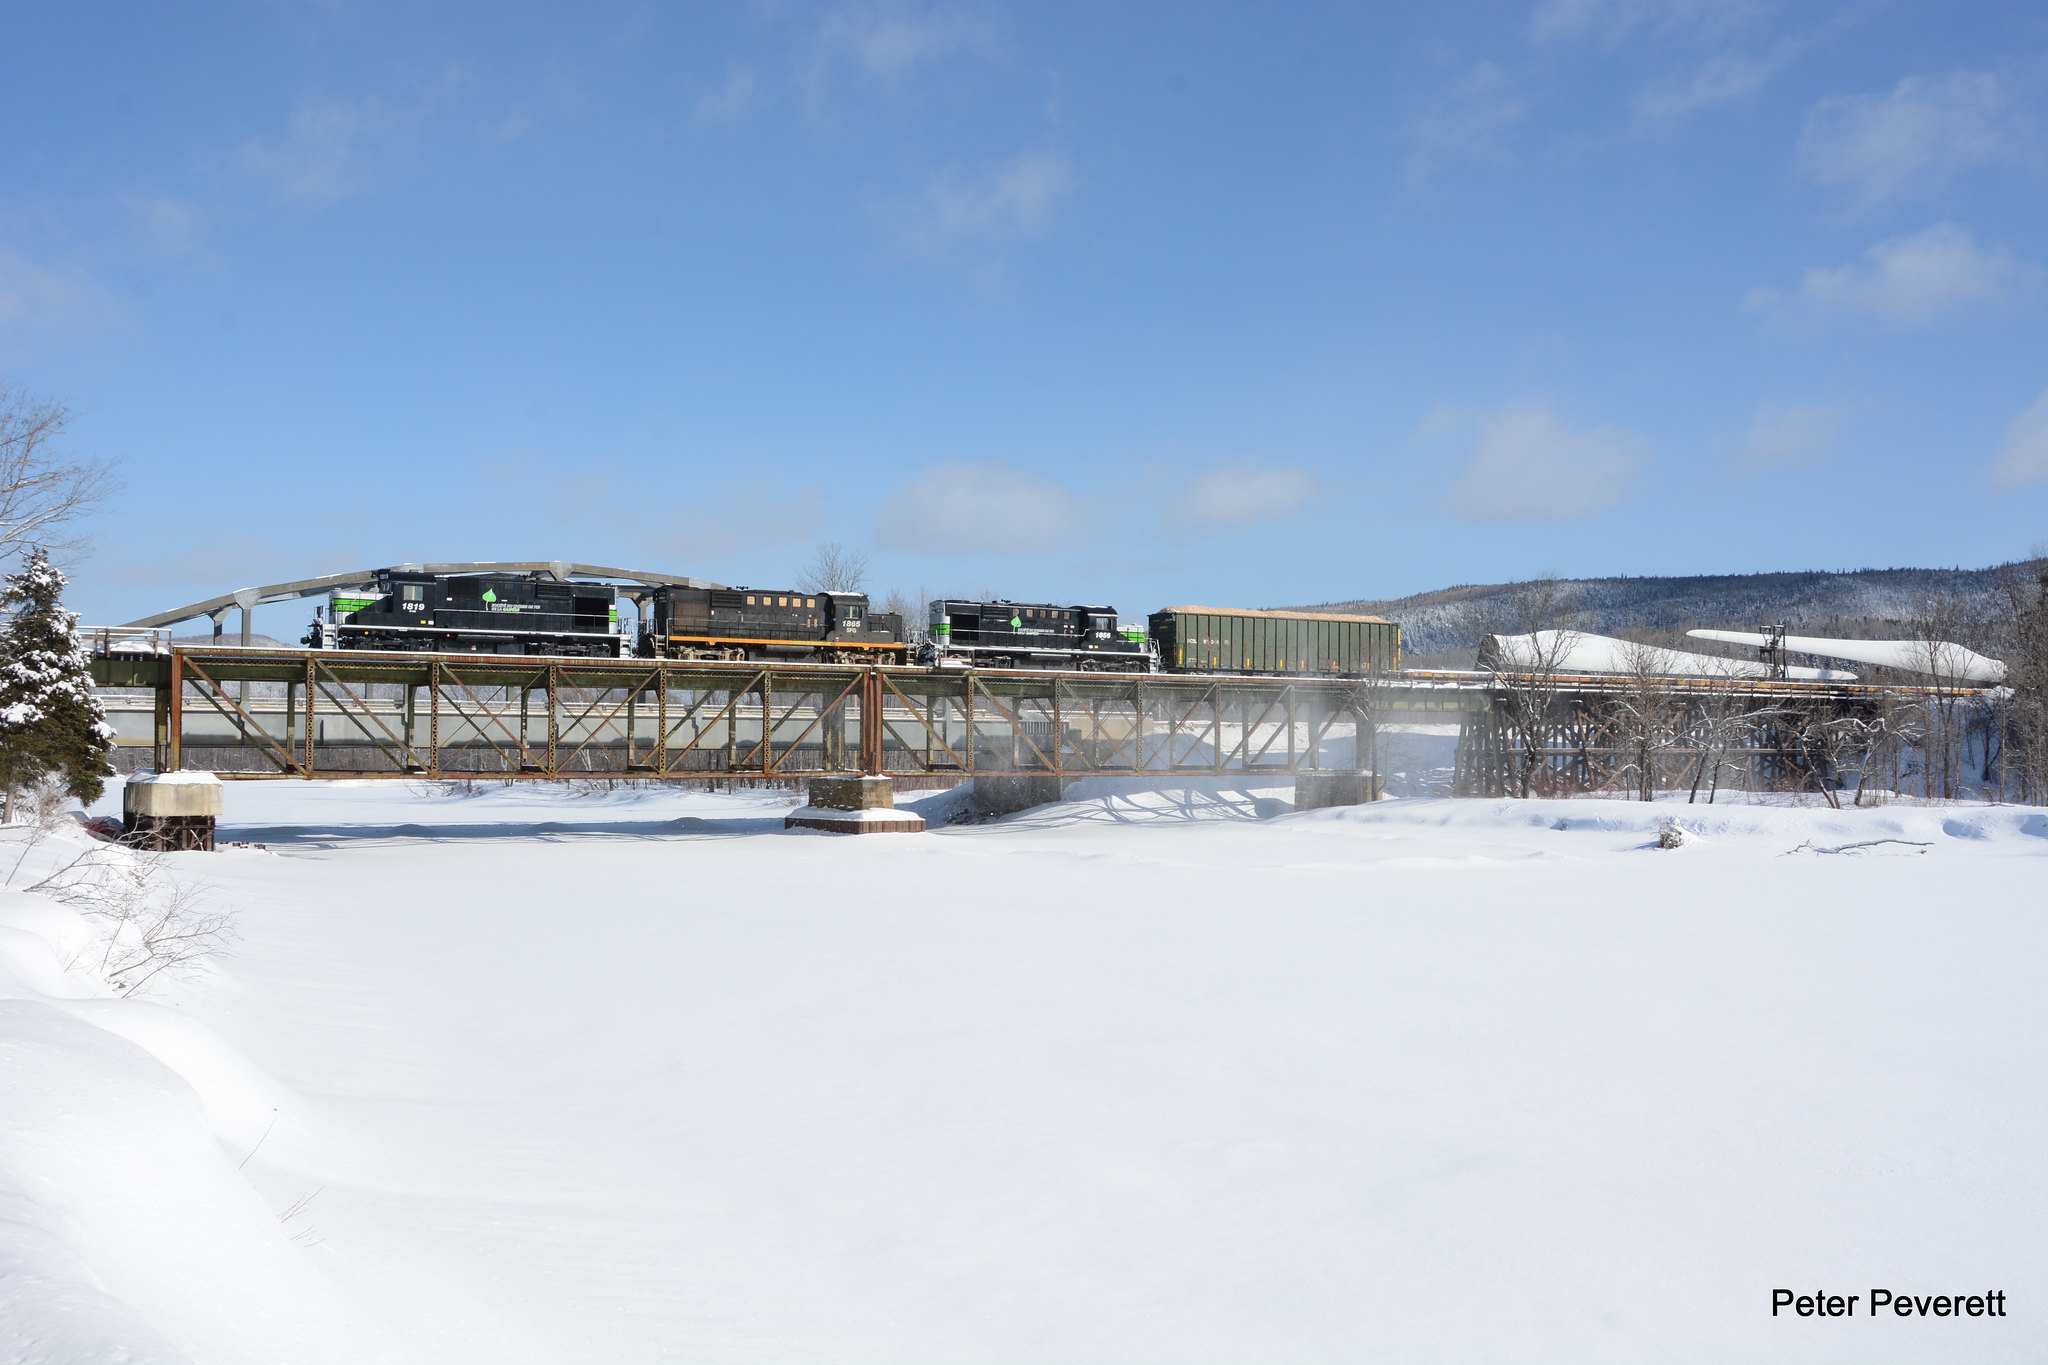 From the winter of 2006 to the winter of 2017 there was not much freight traffic at all on the Gaspe Peninsula . All that was left for the most part was lumber and wood chips from Nouvelle, Quebec.  East of there not much at all.  After years of talks and hope about new business it finally came to be in the form of wind mill parts from a company in Gaspe.  In the company of friends it was great to witness the third train hauling windmill parts depart from New Richmond, Quebec on March 4, 2017. Societe du Chemin De Fer De La Gaspesie RS-18 # 1819, 1865, 1856 have the train of 72 flats underway at Grand Cascapedia, Quebec crossing the Cascapedia River. 